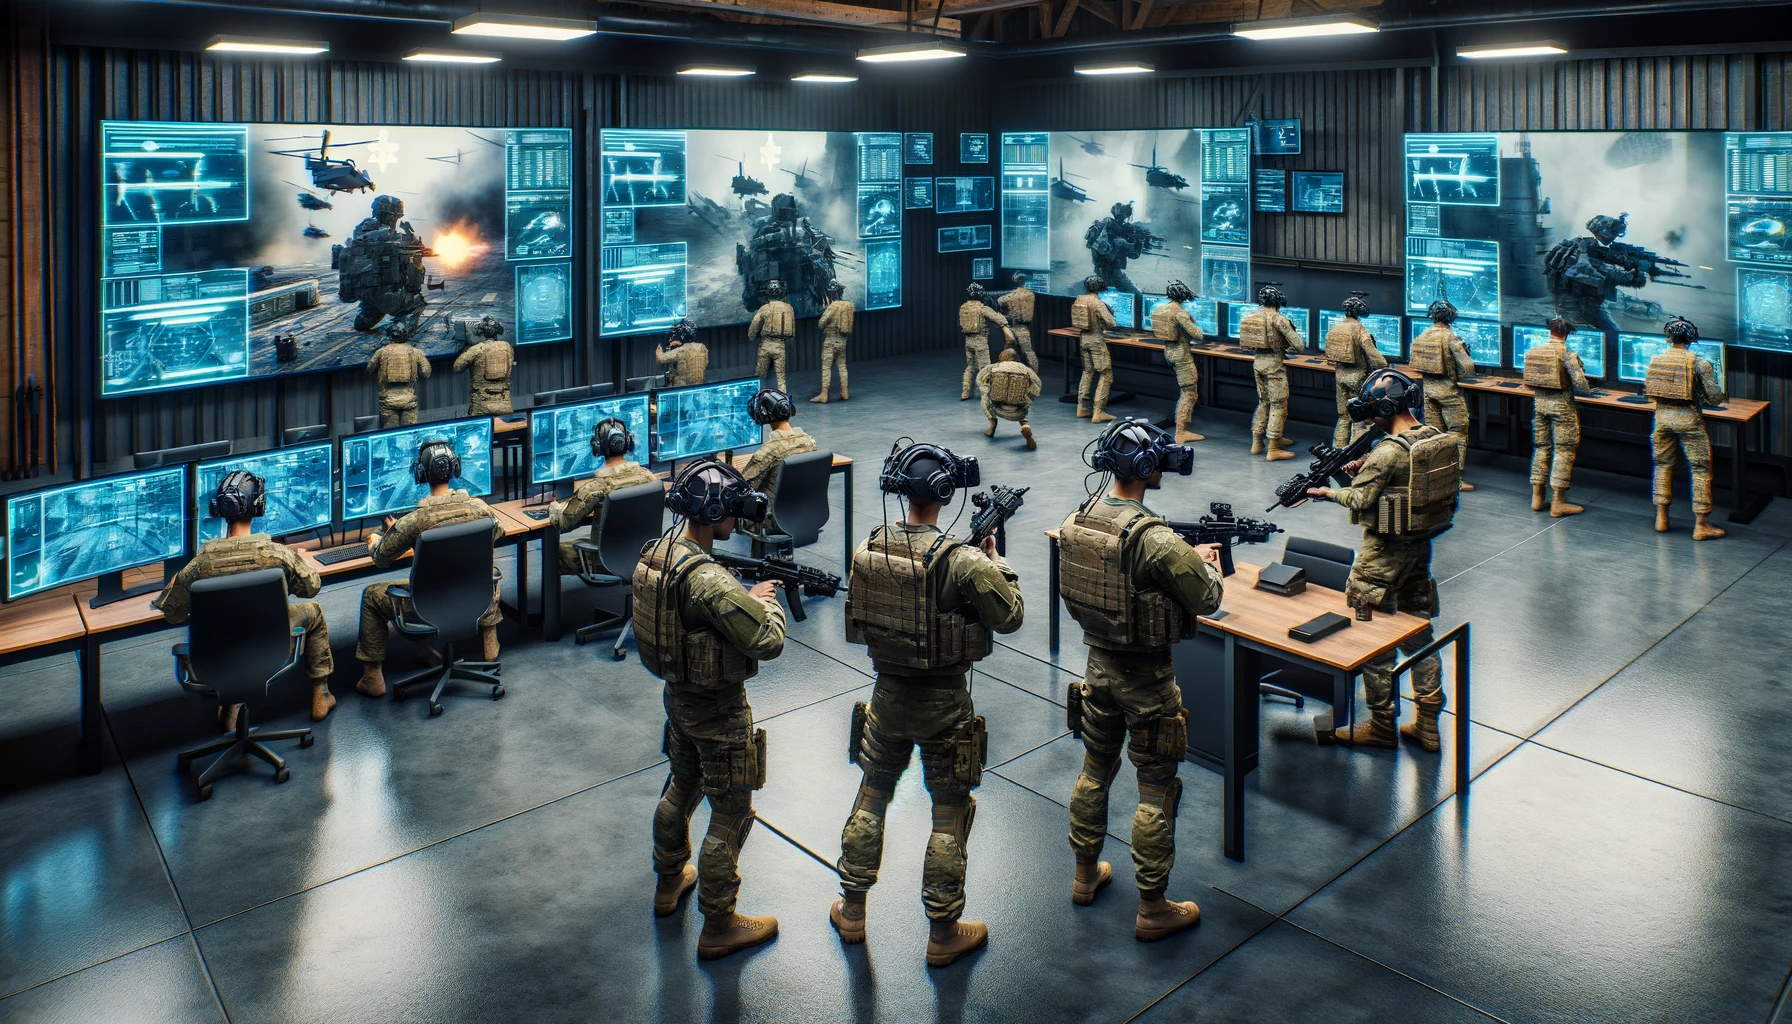 A training room in a military environment with several soldiers equipped with virtual reality equipment, interacting with a complex virtual combat environment.